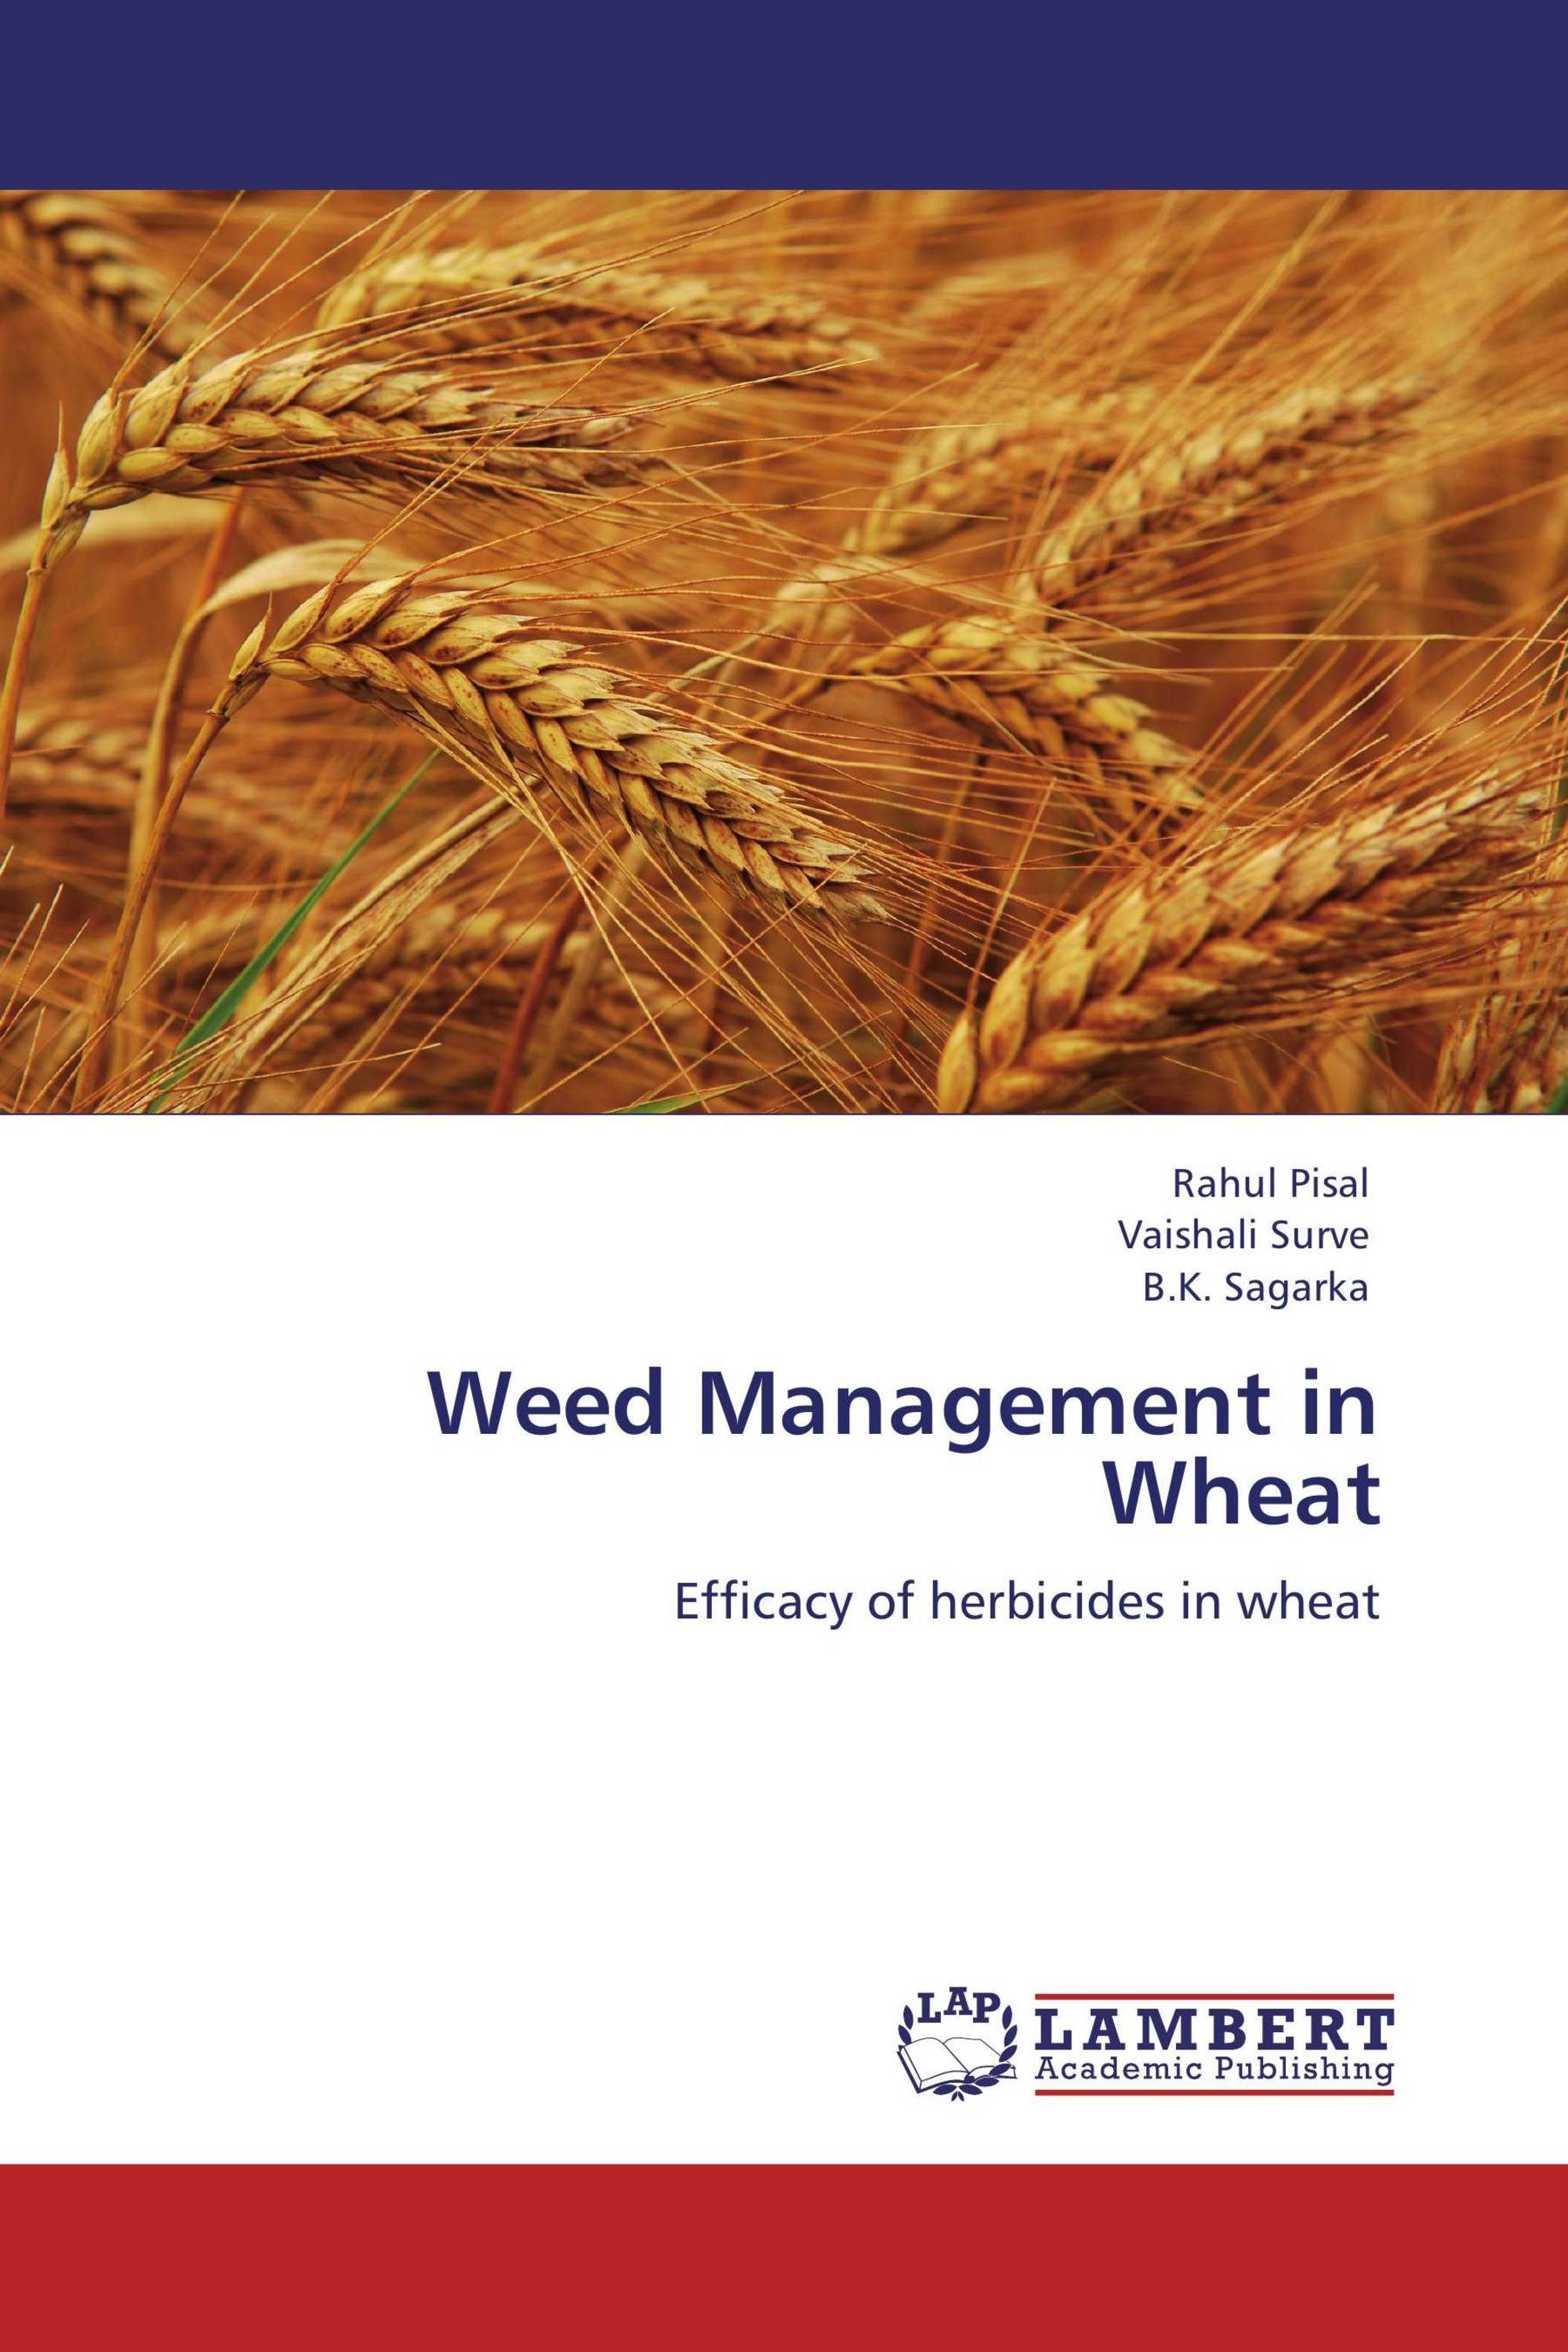 weed management in wheat research paper